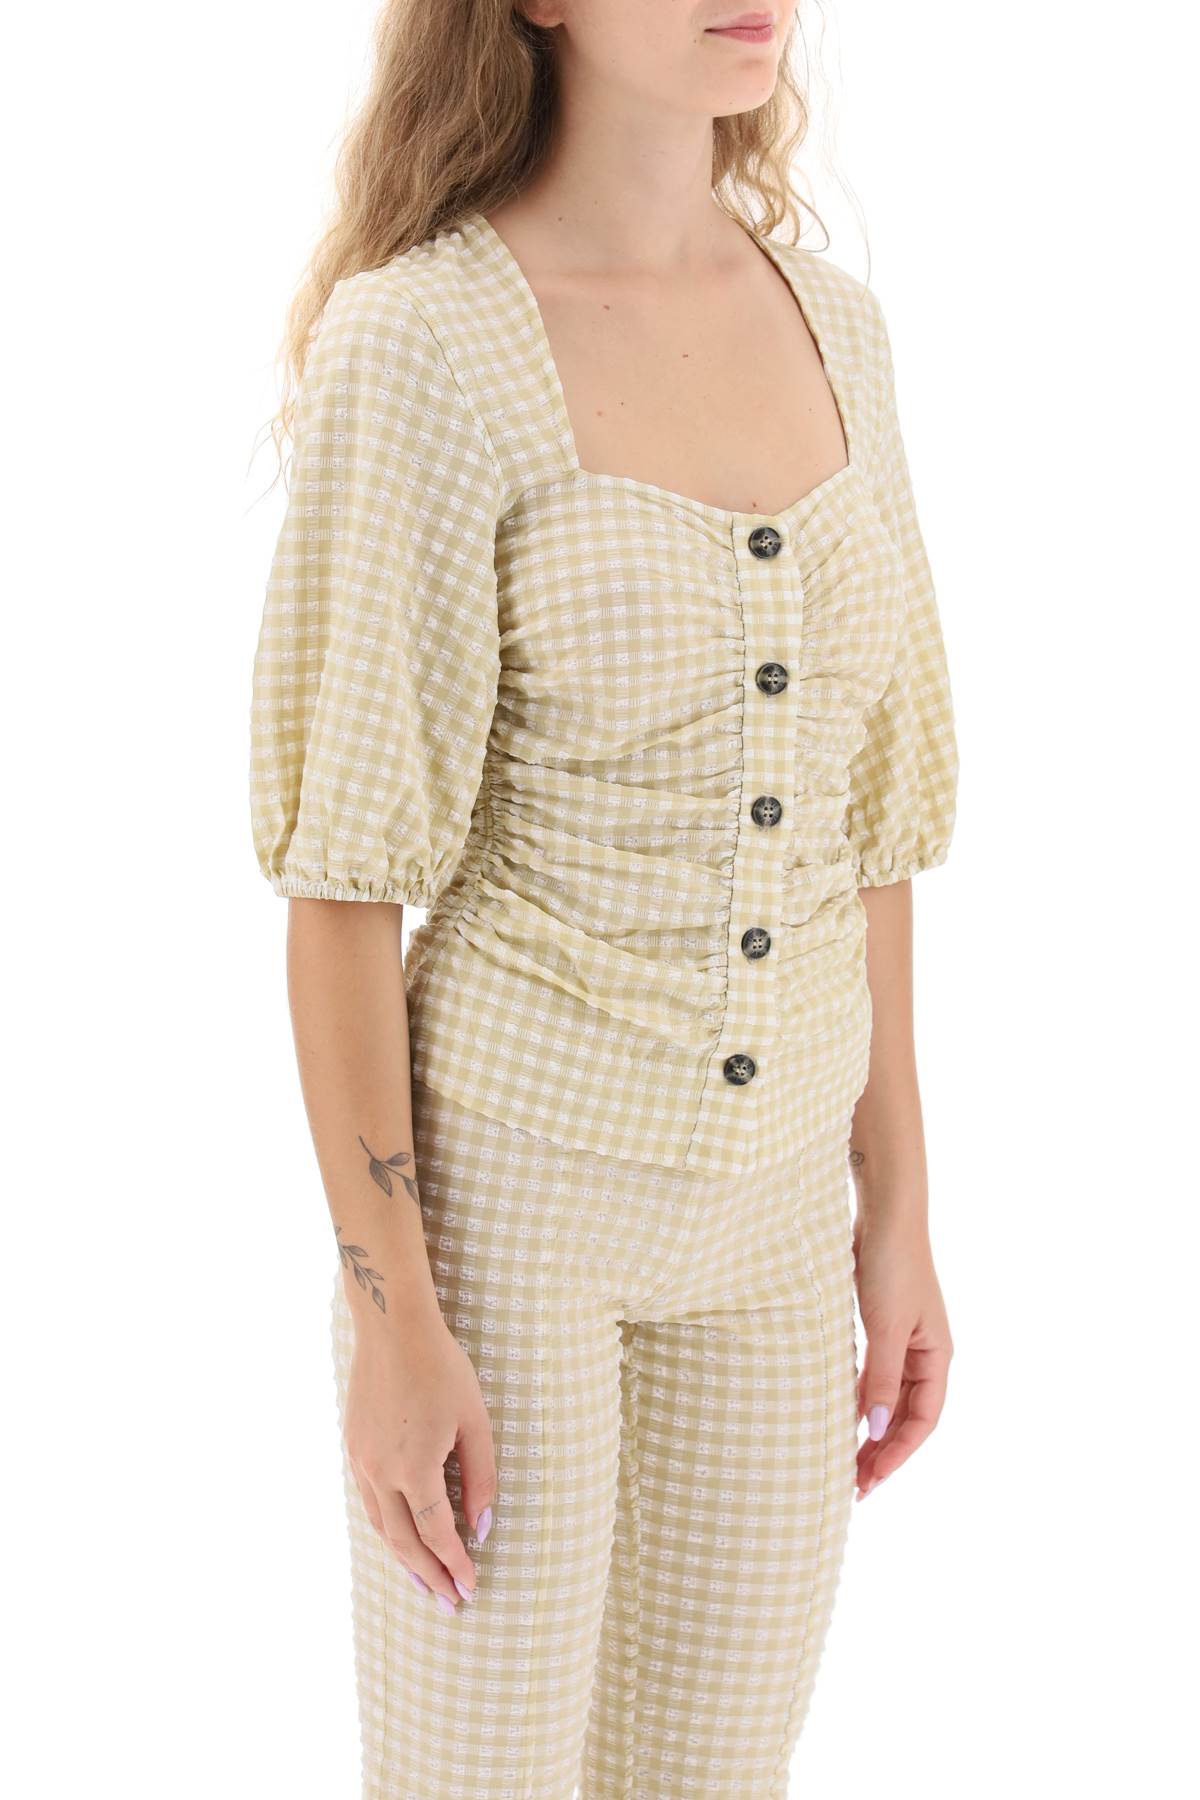 Ganni gathered blouse with gingham motif-1